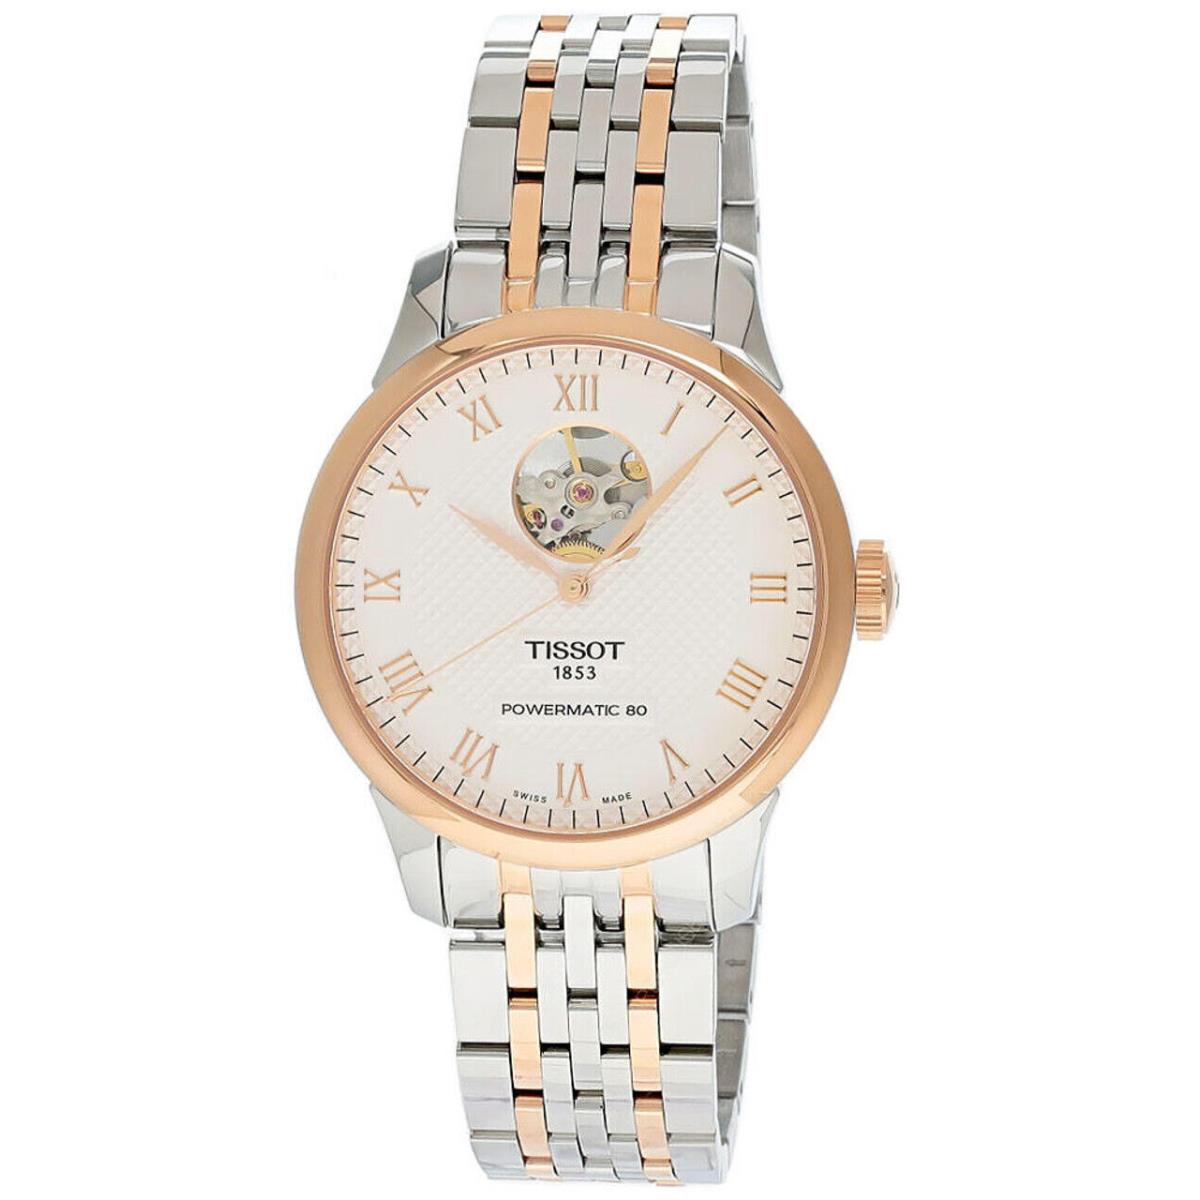 Tissot LE Locle 80 Open Heart Two-tone SS Men`s Watch T0064072203302 - Silver Dial, Silver& Rose Gold 5N Band, Rose Gold Bezel